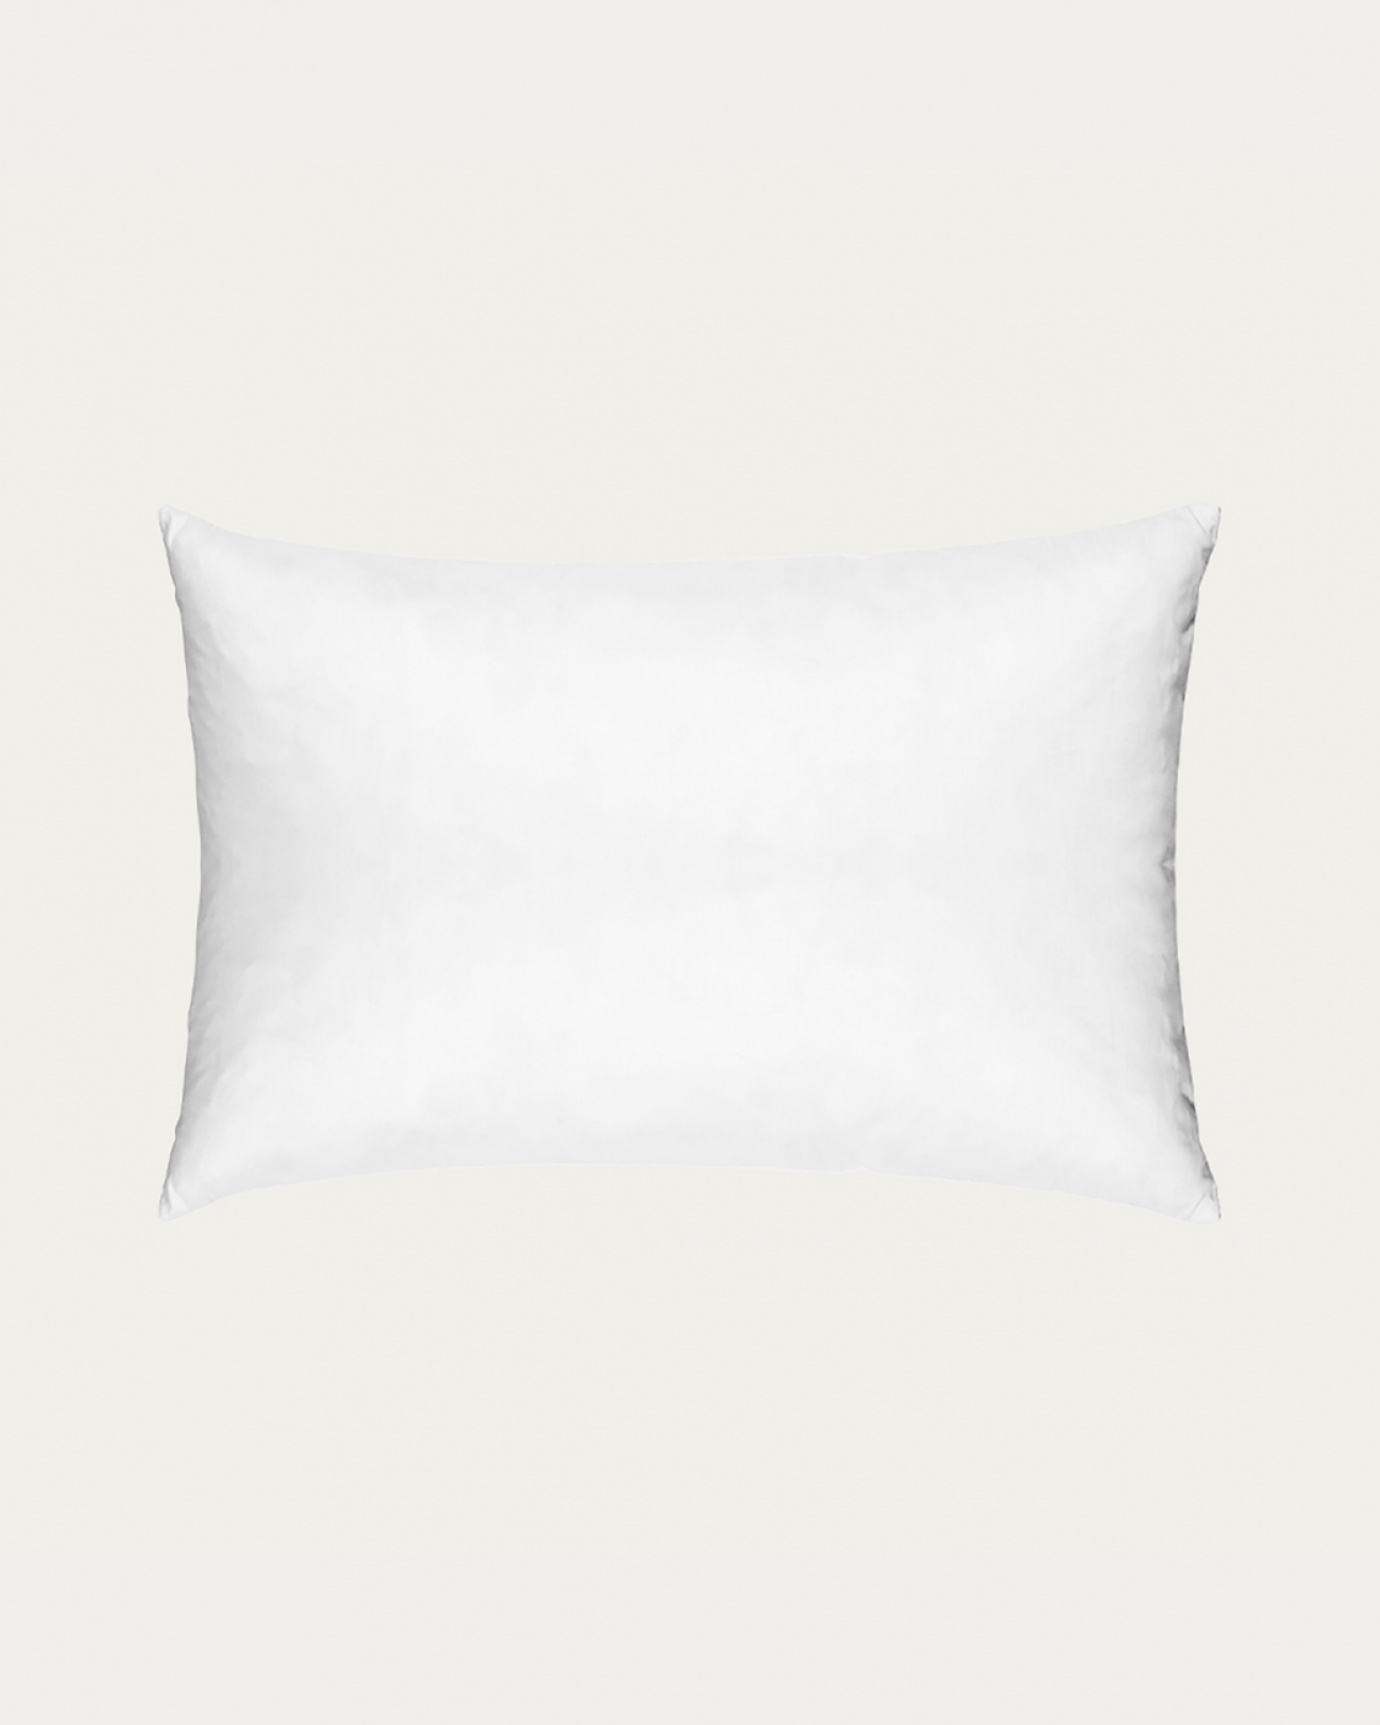 Product image white SYNTHETIC cushion insert made of cotton with polyester filling from LINUM DESIGN. Size 35x50 cm.